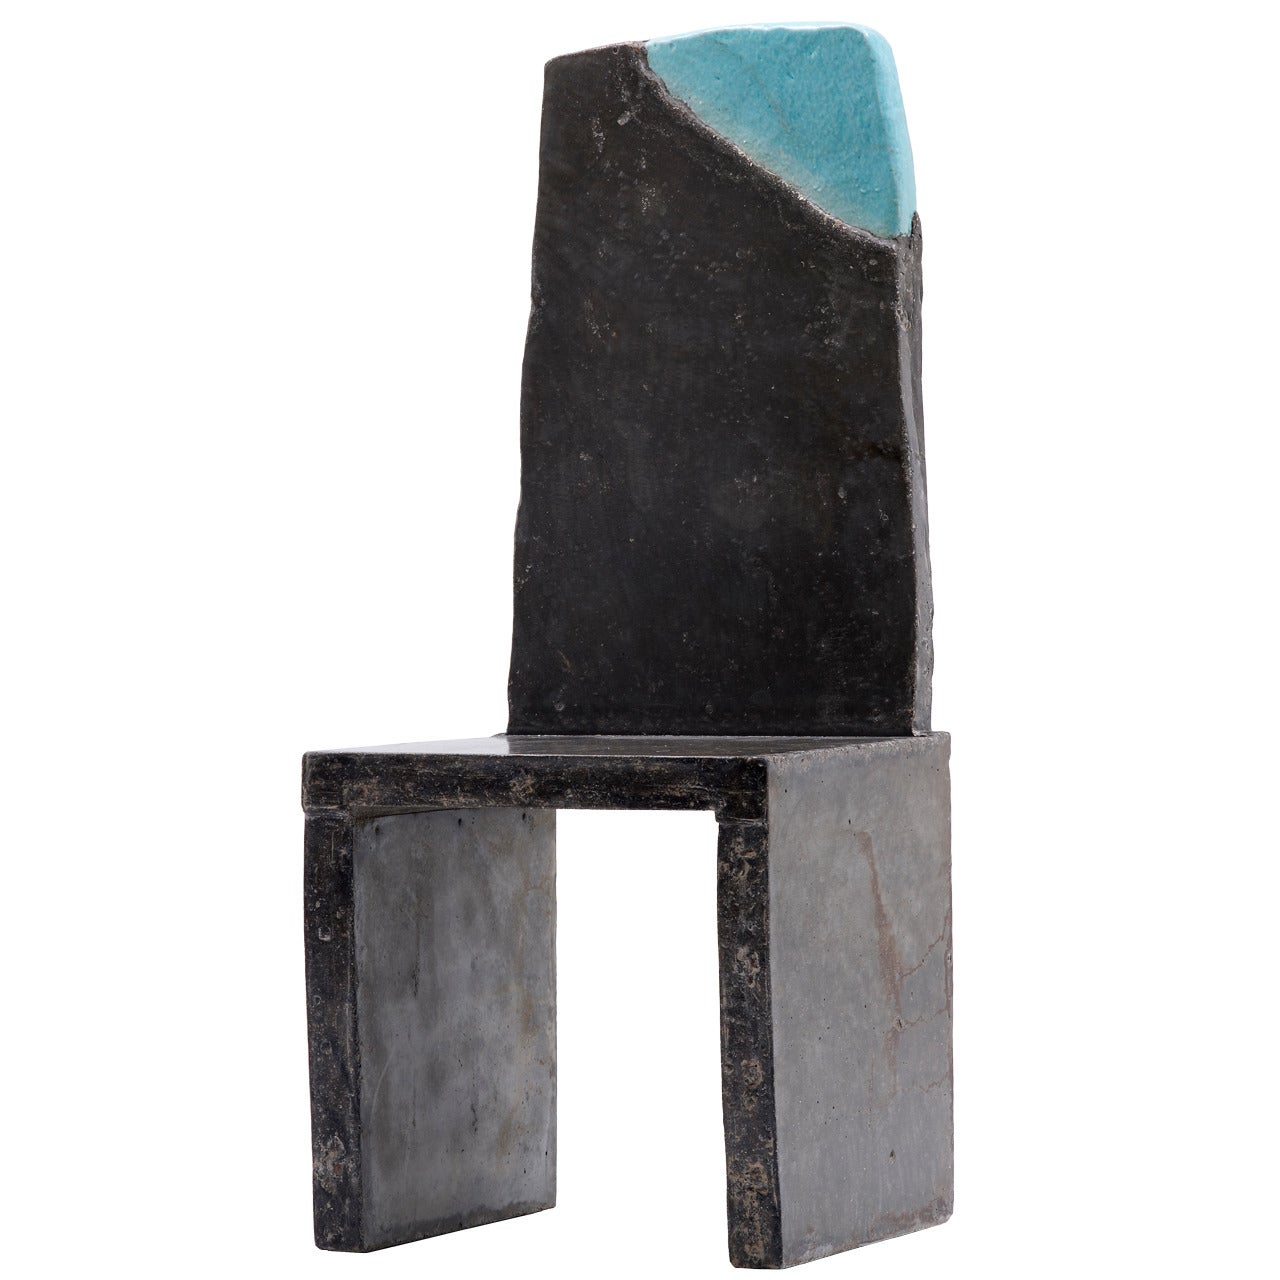 Unique Indoor/Outdoor Concrete Glazed Ceramic Chair by Lee Hun Chung, 2011 For Sale